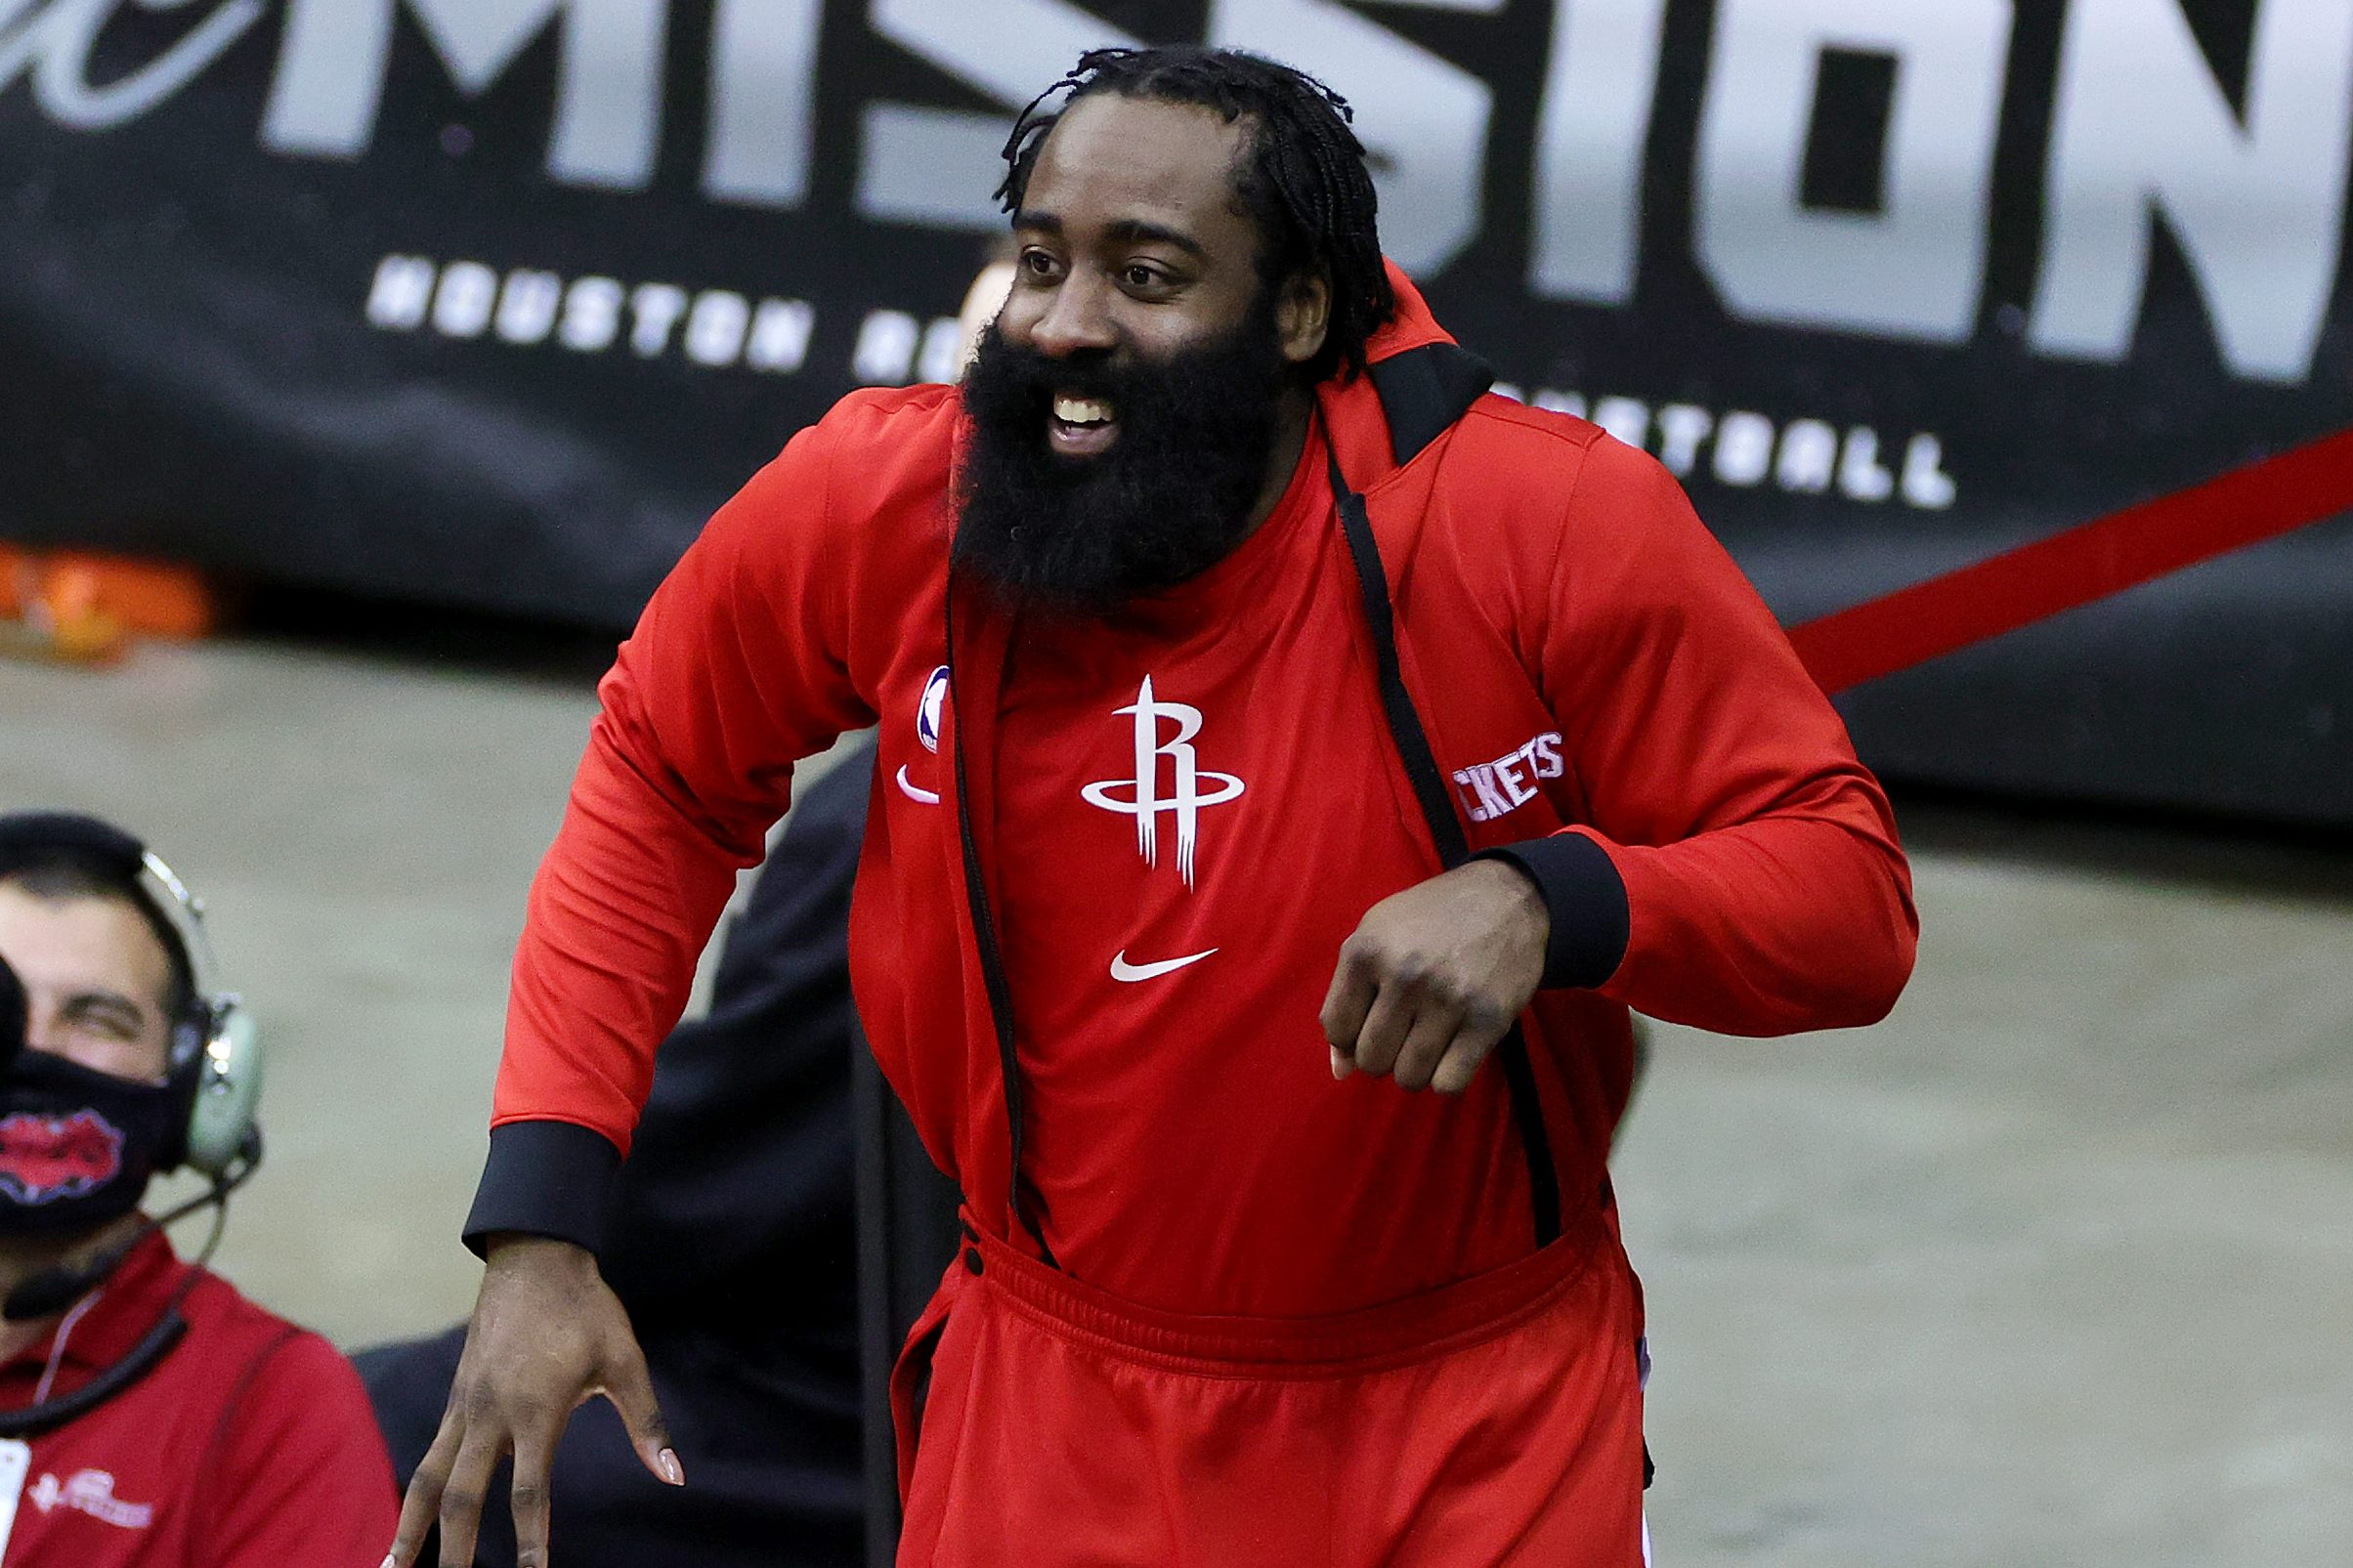 James Harden May Miss NBA Season Opener for Rockets Over Illicit Strip Club Visit